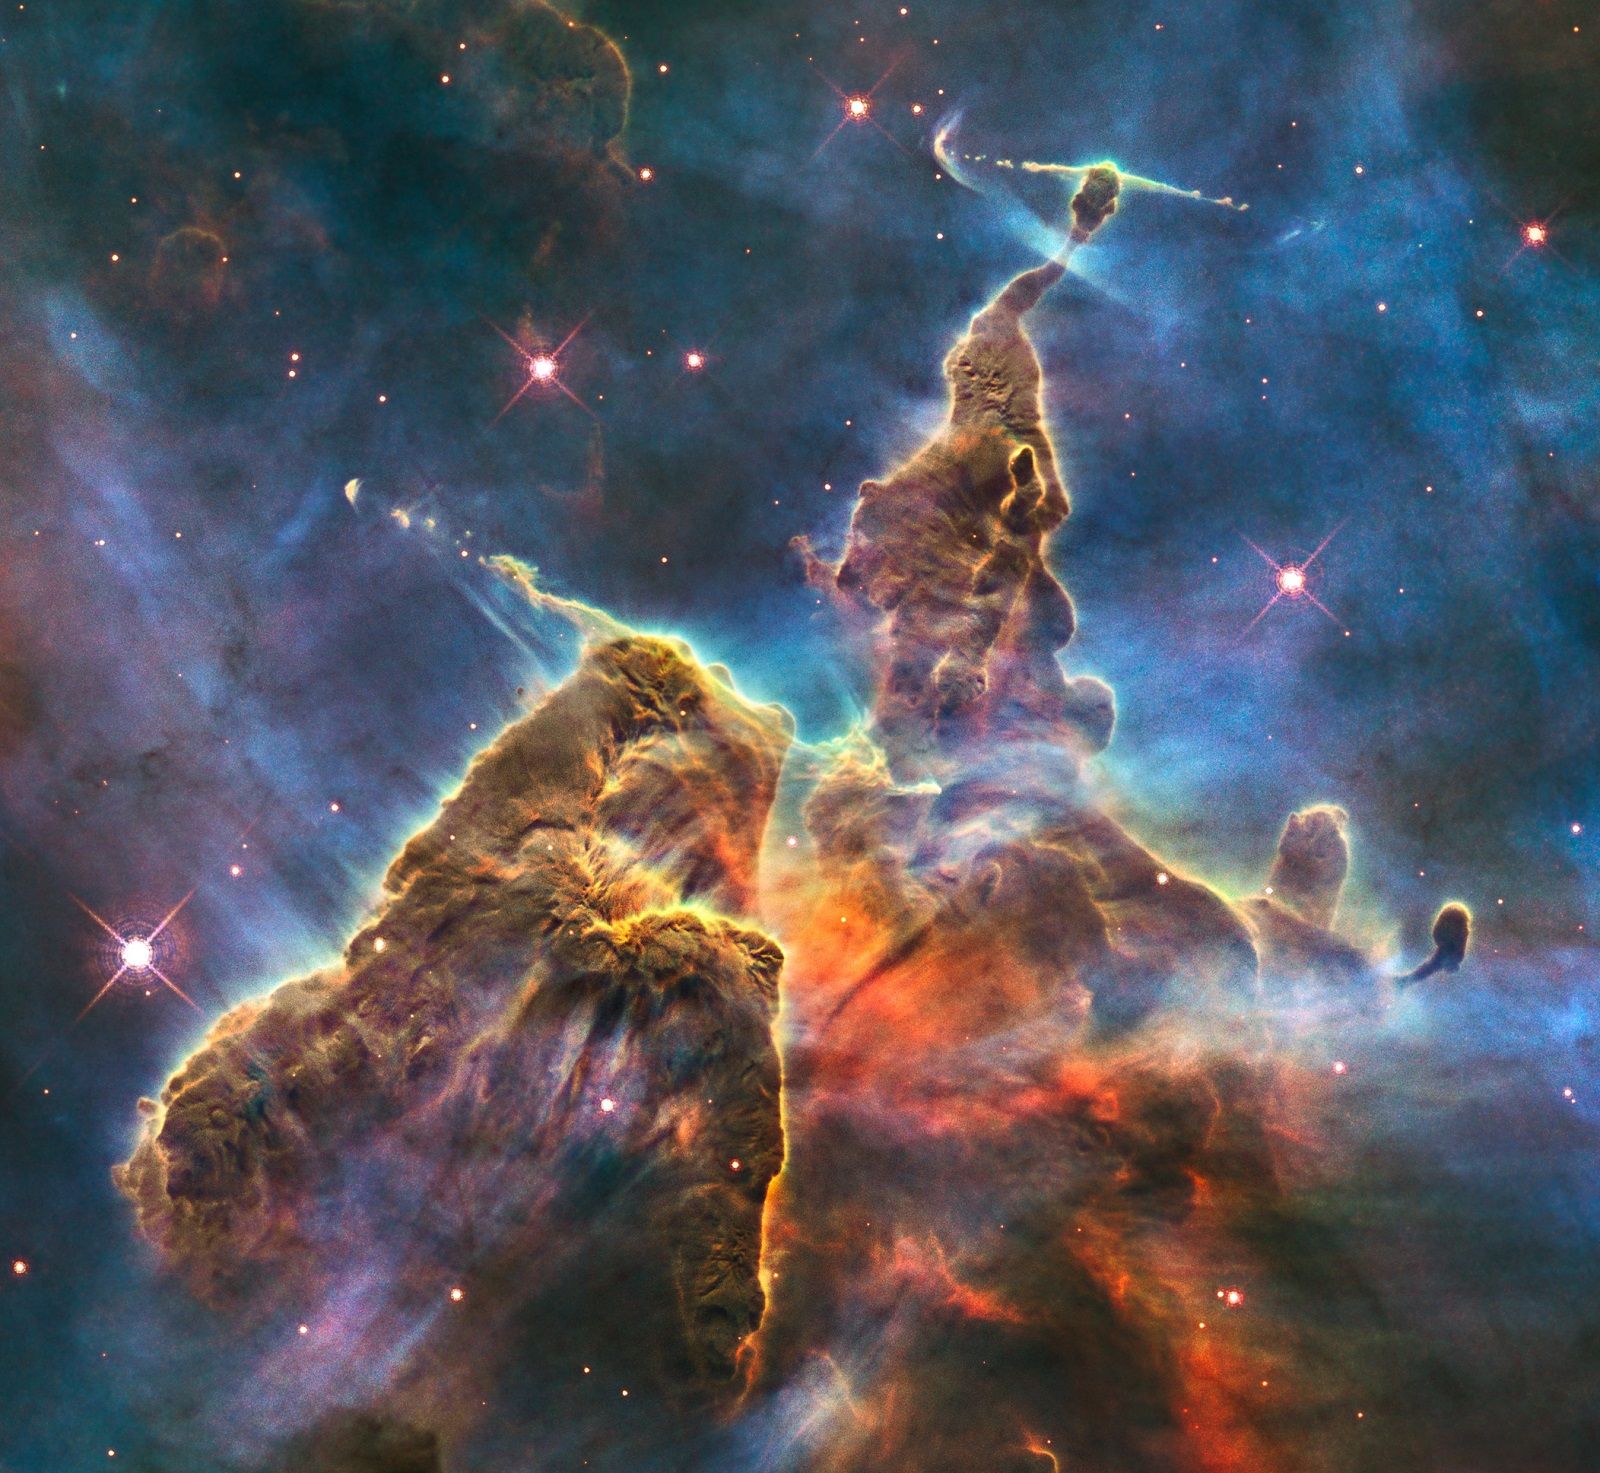 Astounding images from the depths of the Universe courtesy of the Hubble Space Telescope image 14